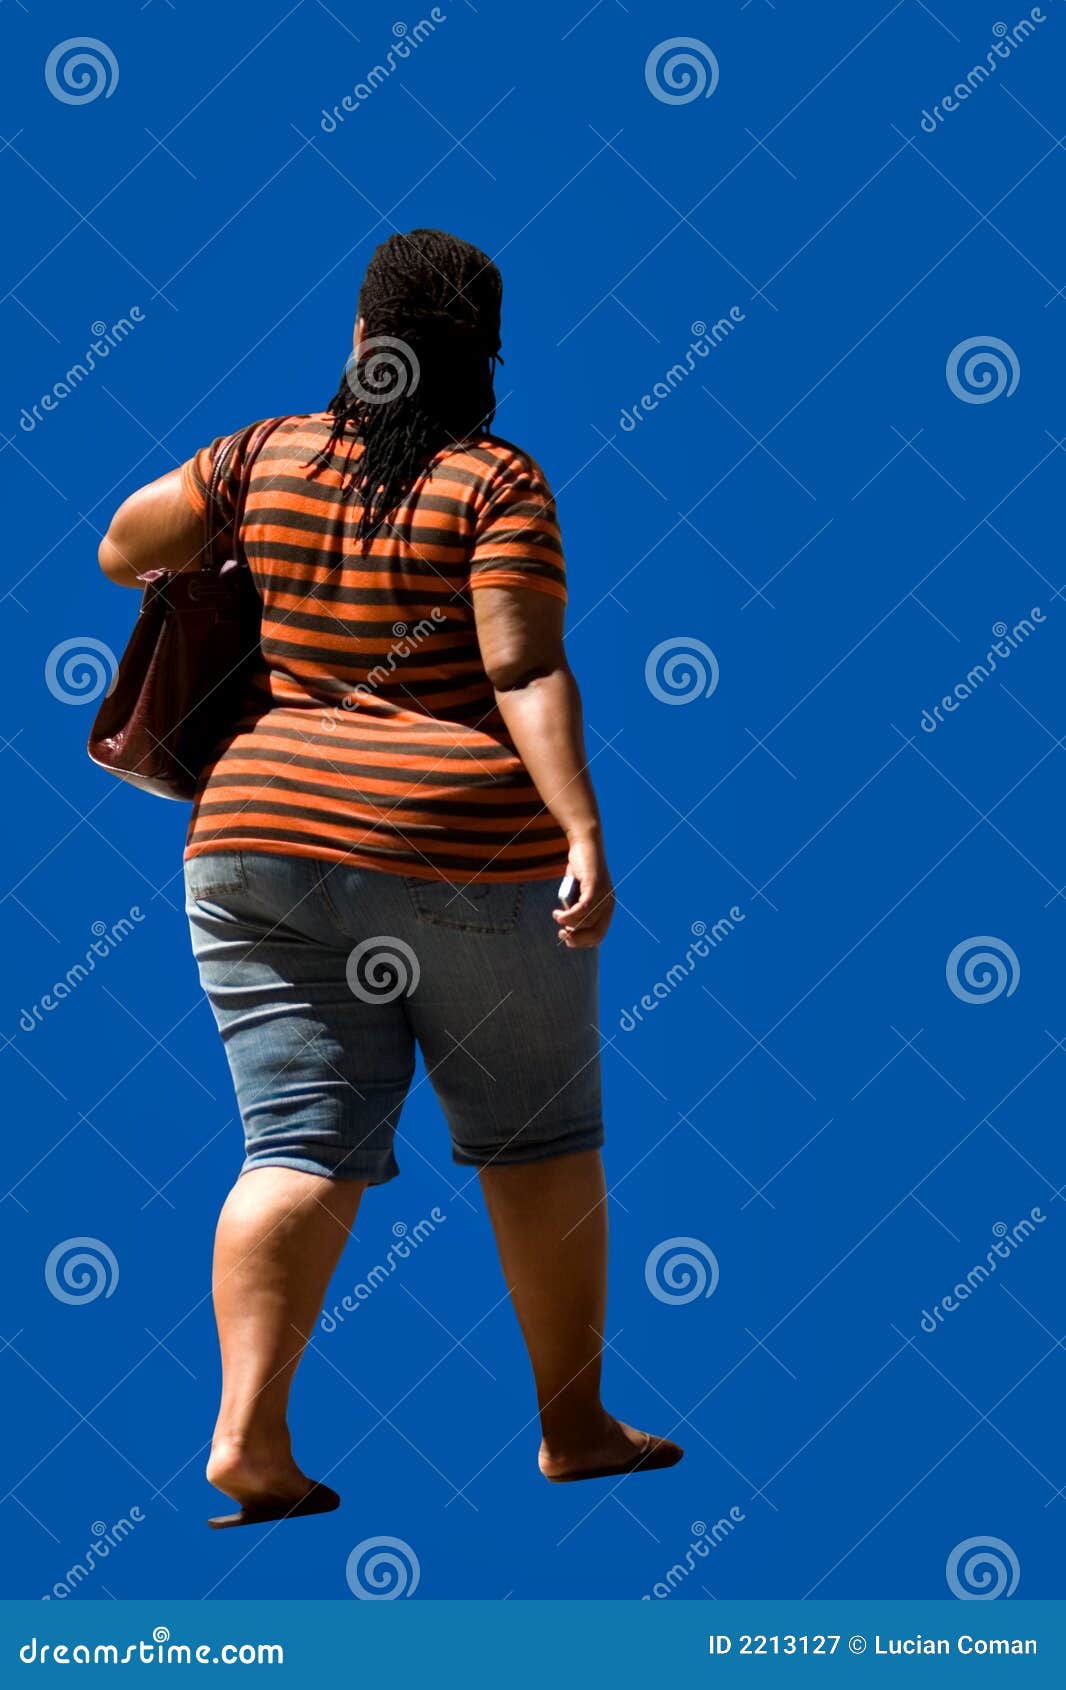 Women With Overweight From Behind Hoodoo Wallpaper